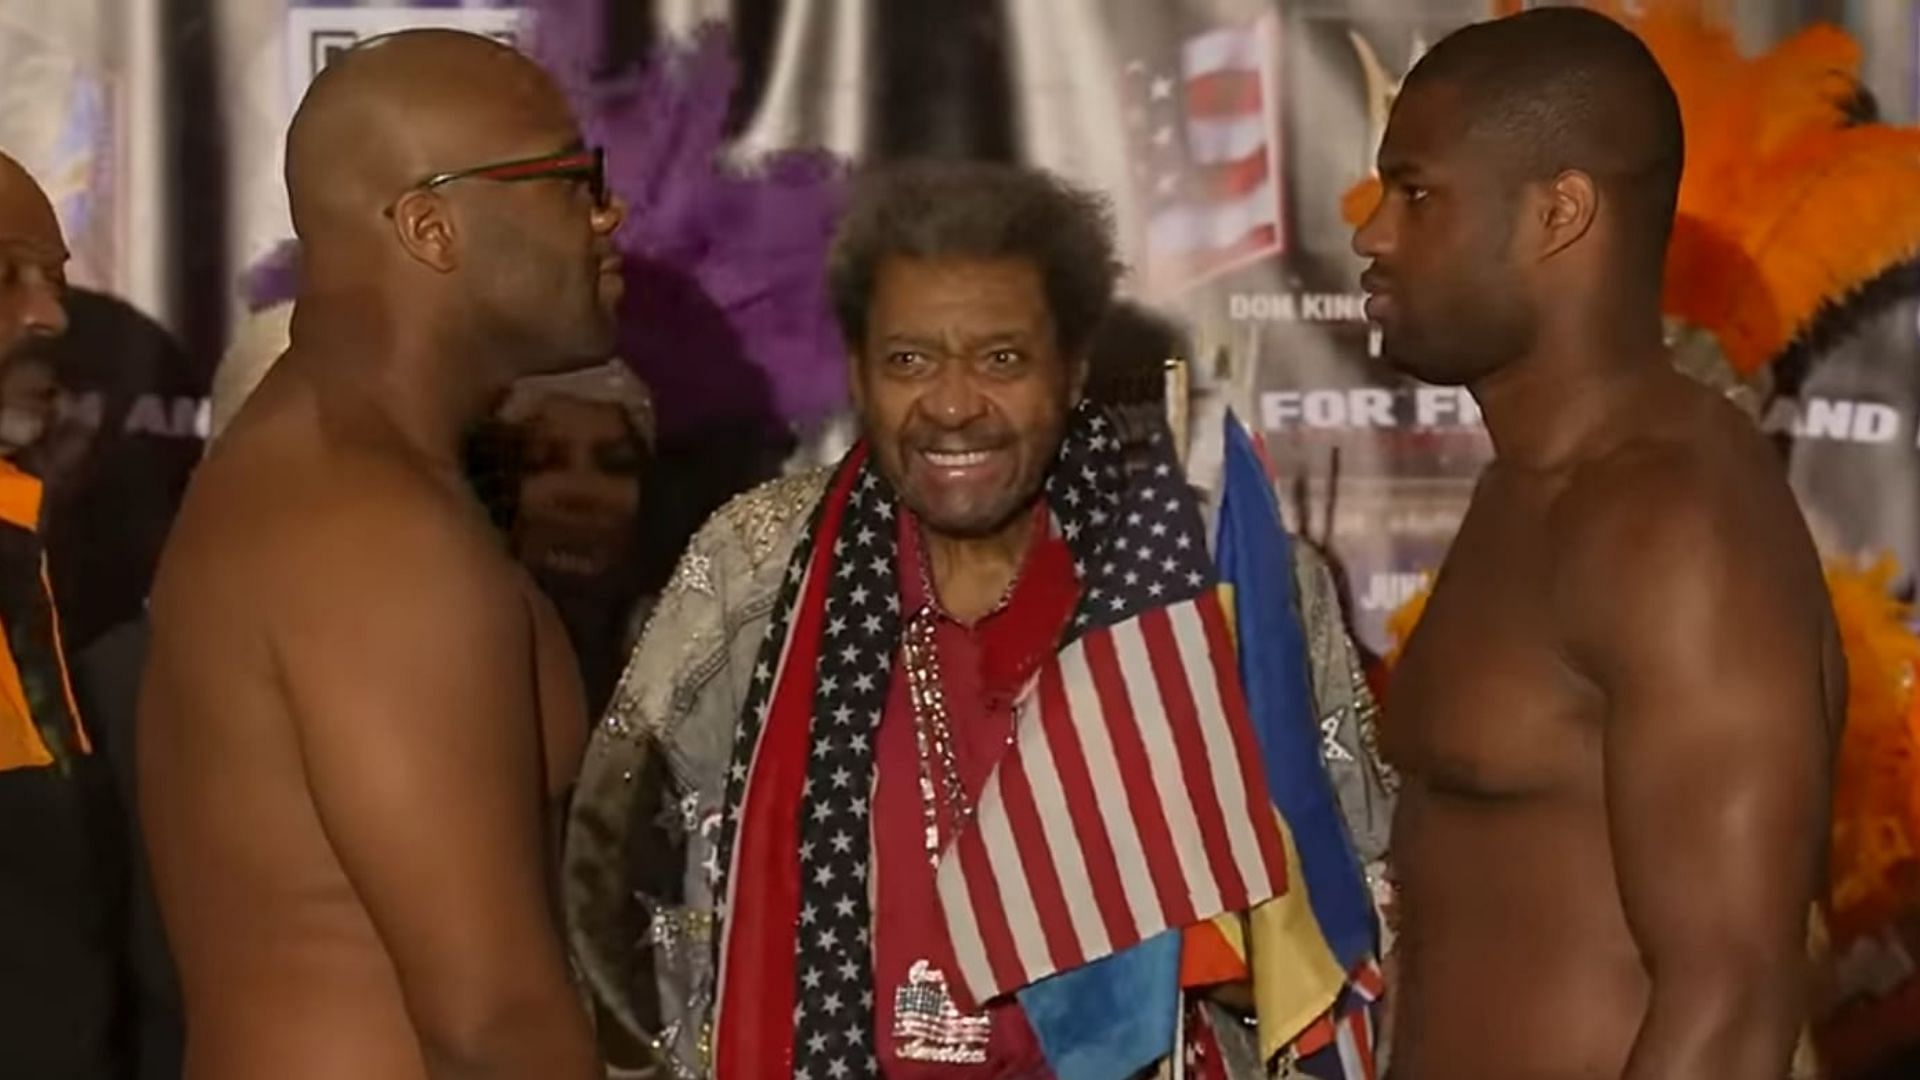 Dubois vs Bryan is being promoted by boxing legend Don King